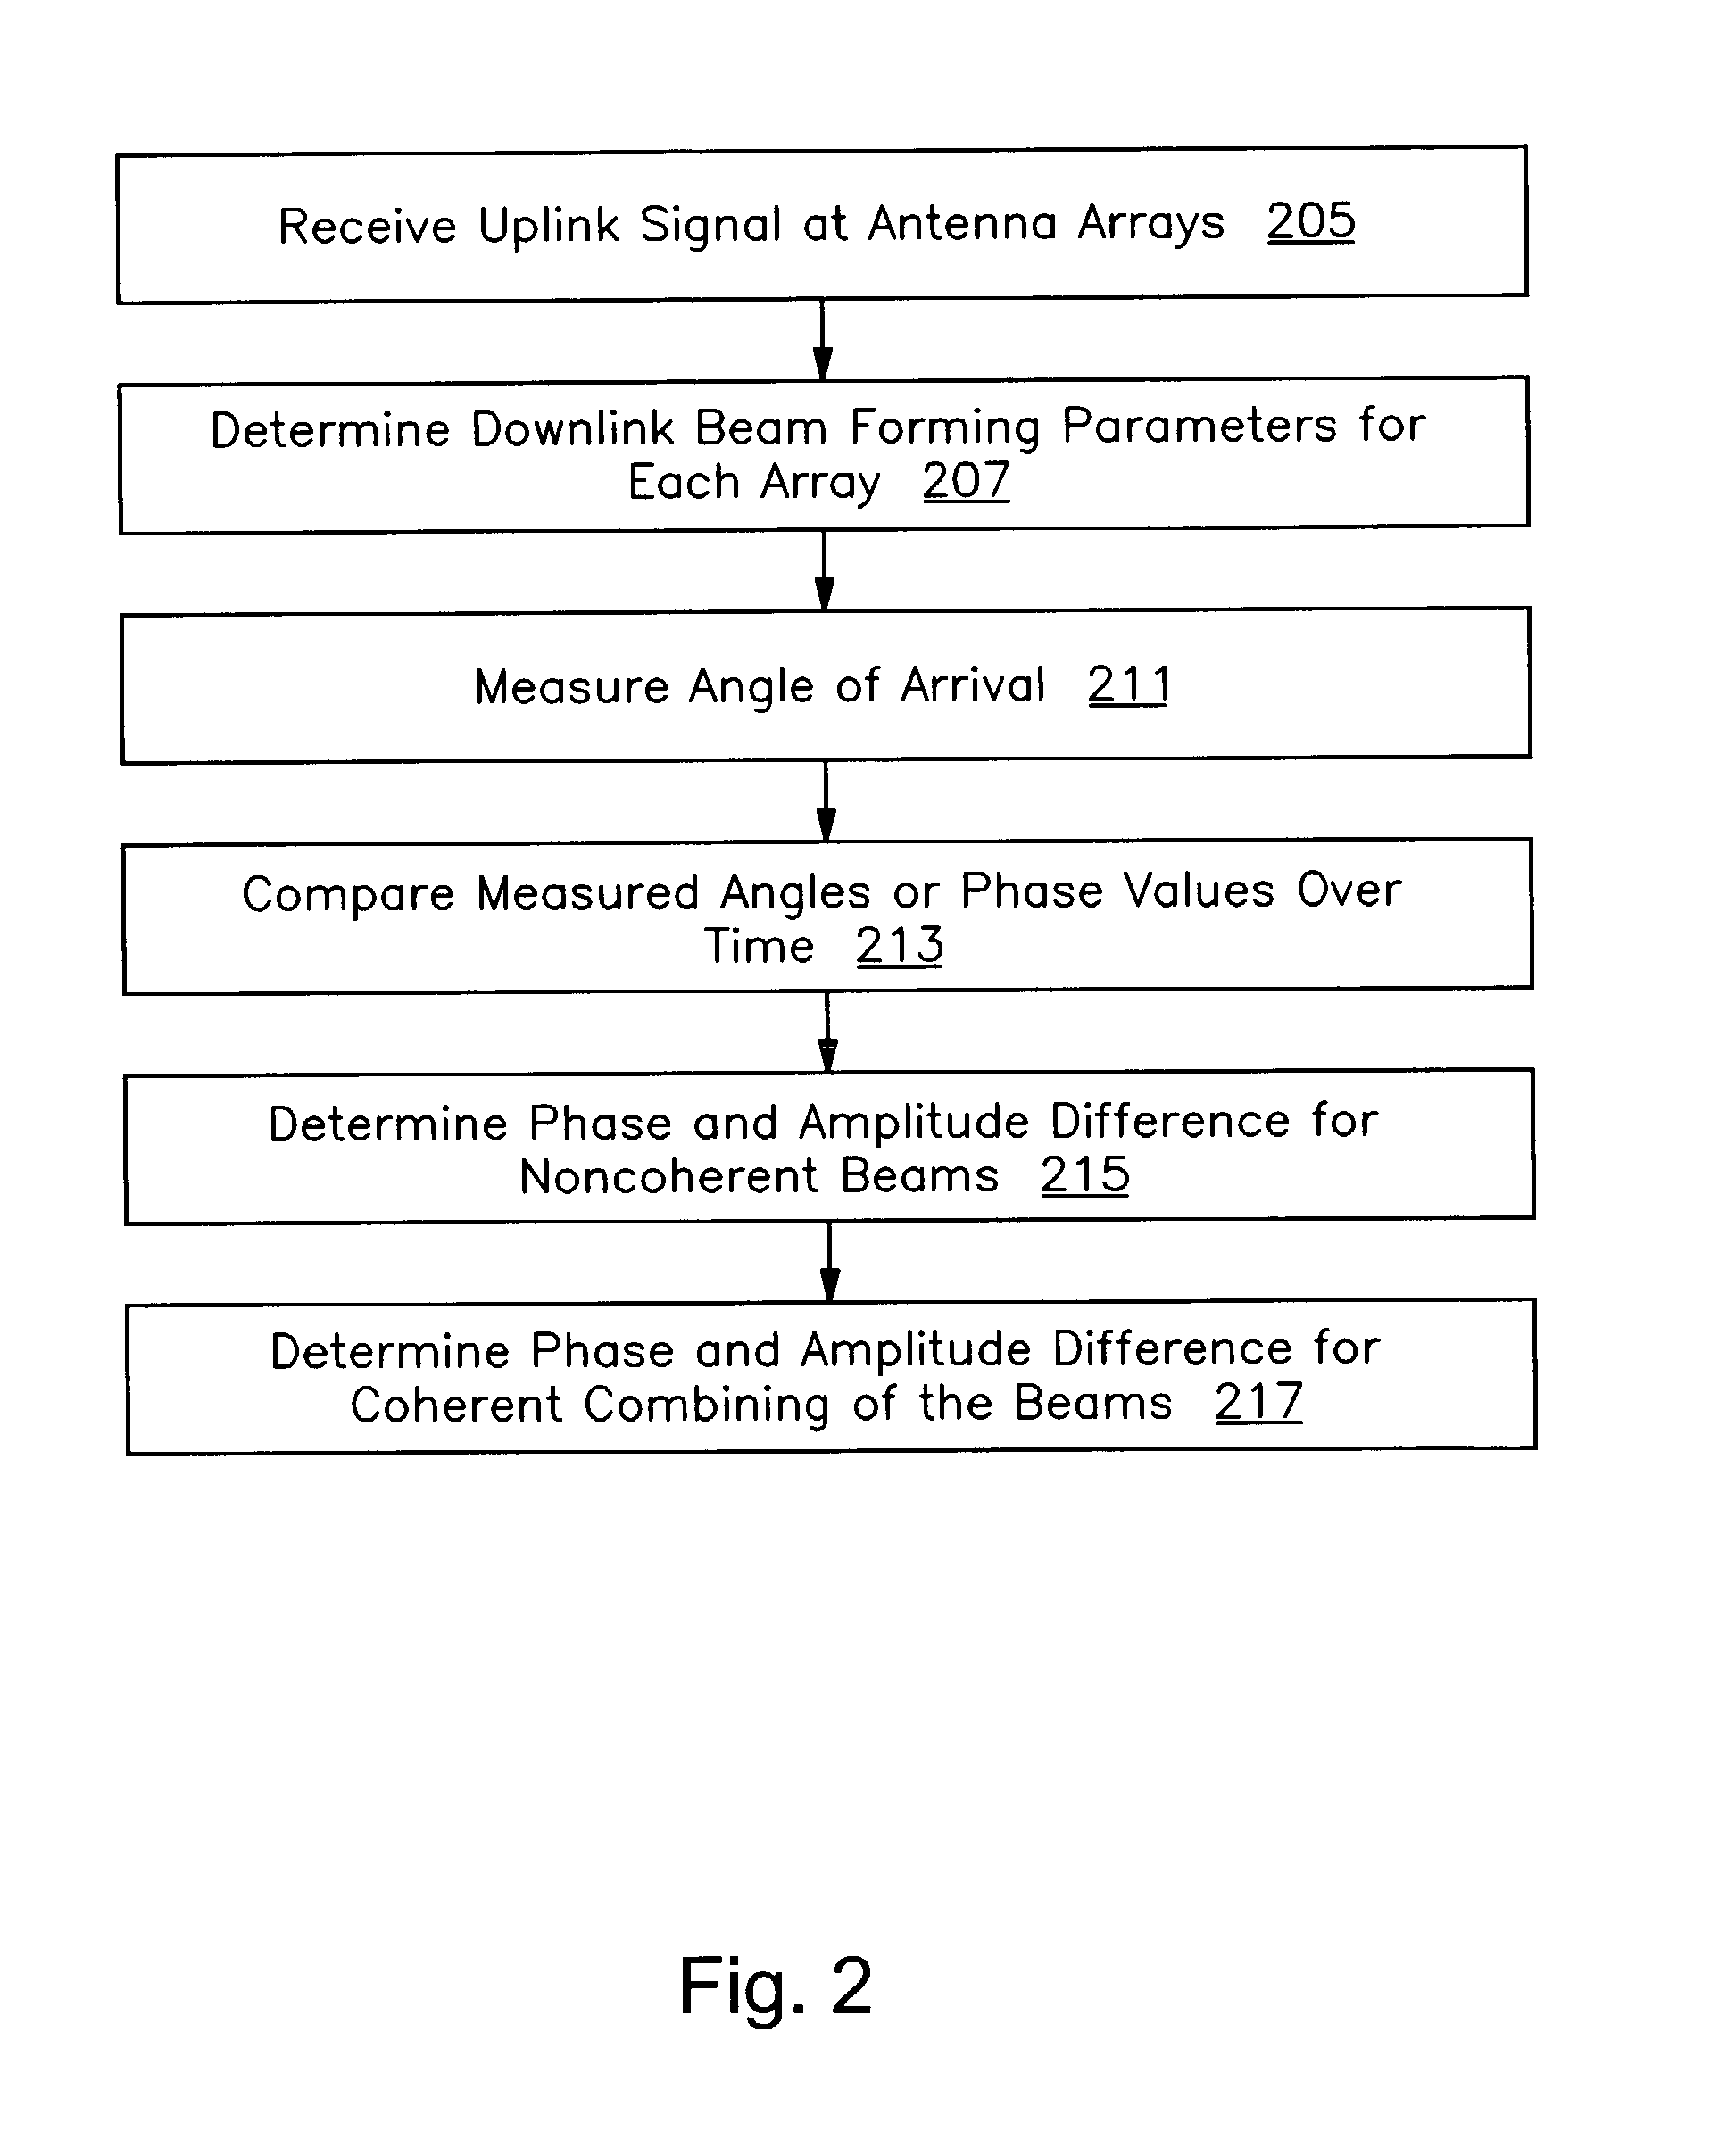 Beam forming and transmit diversity in a multiple array radio communications system